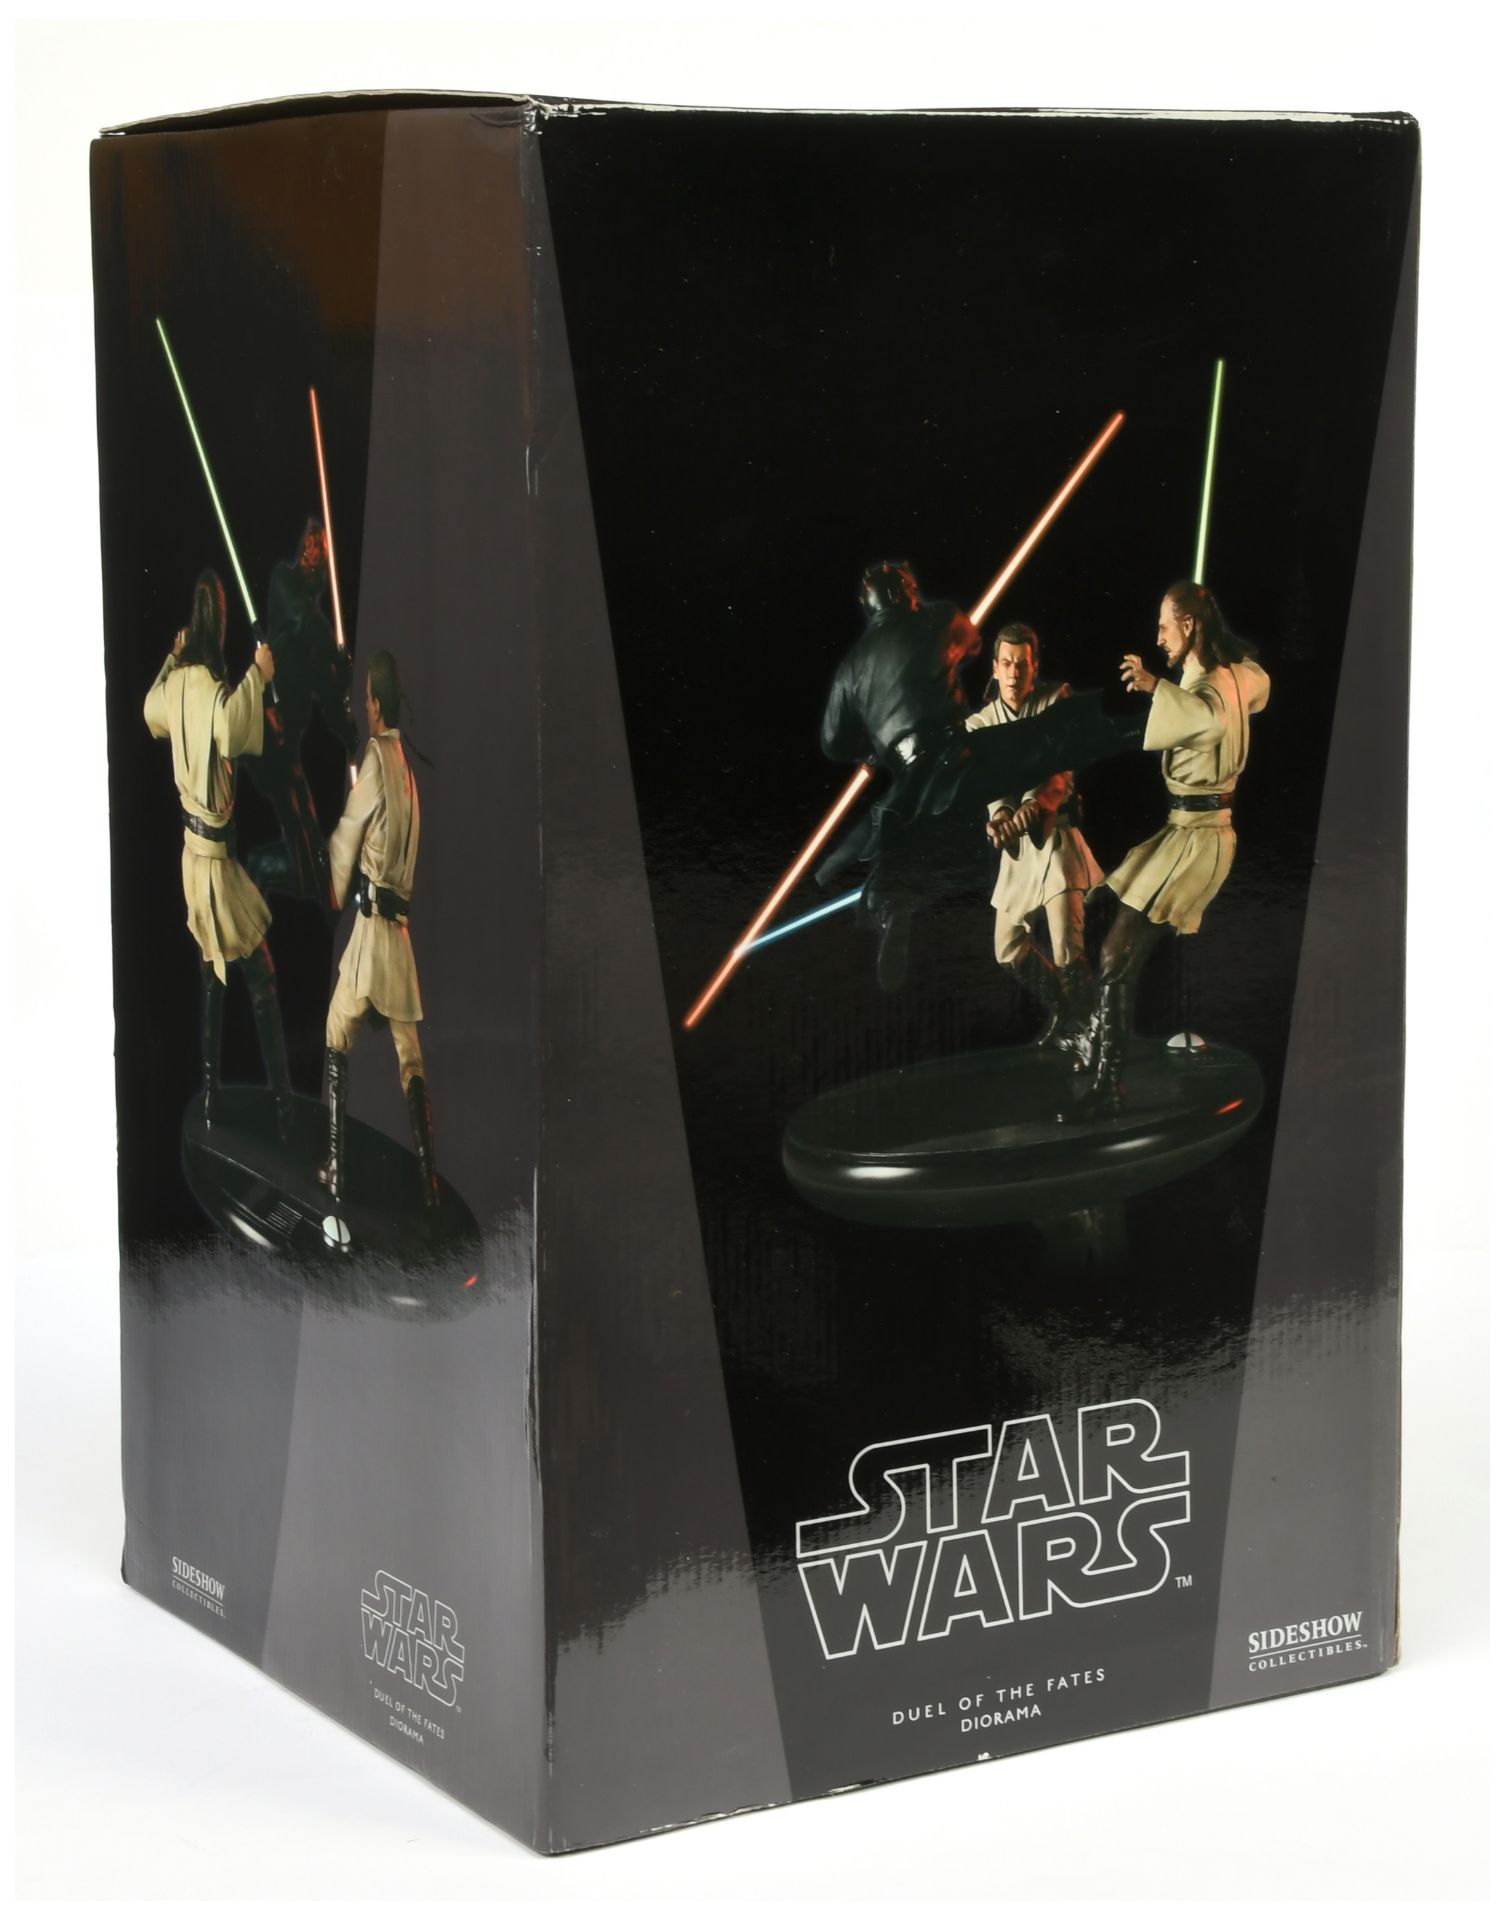 Sideshow Star Wars Duel Of The Fates Diorama